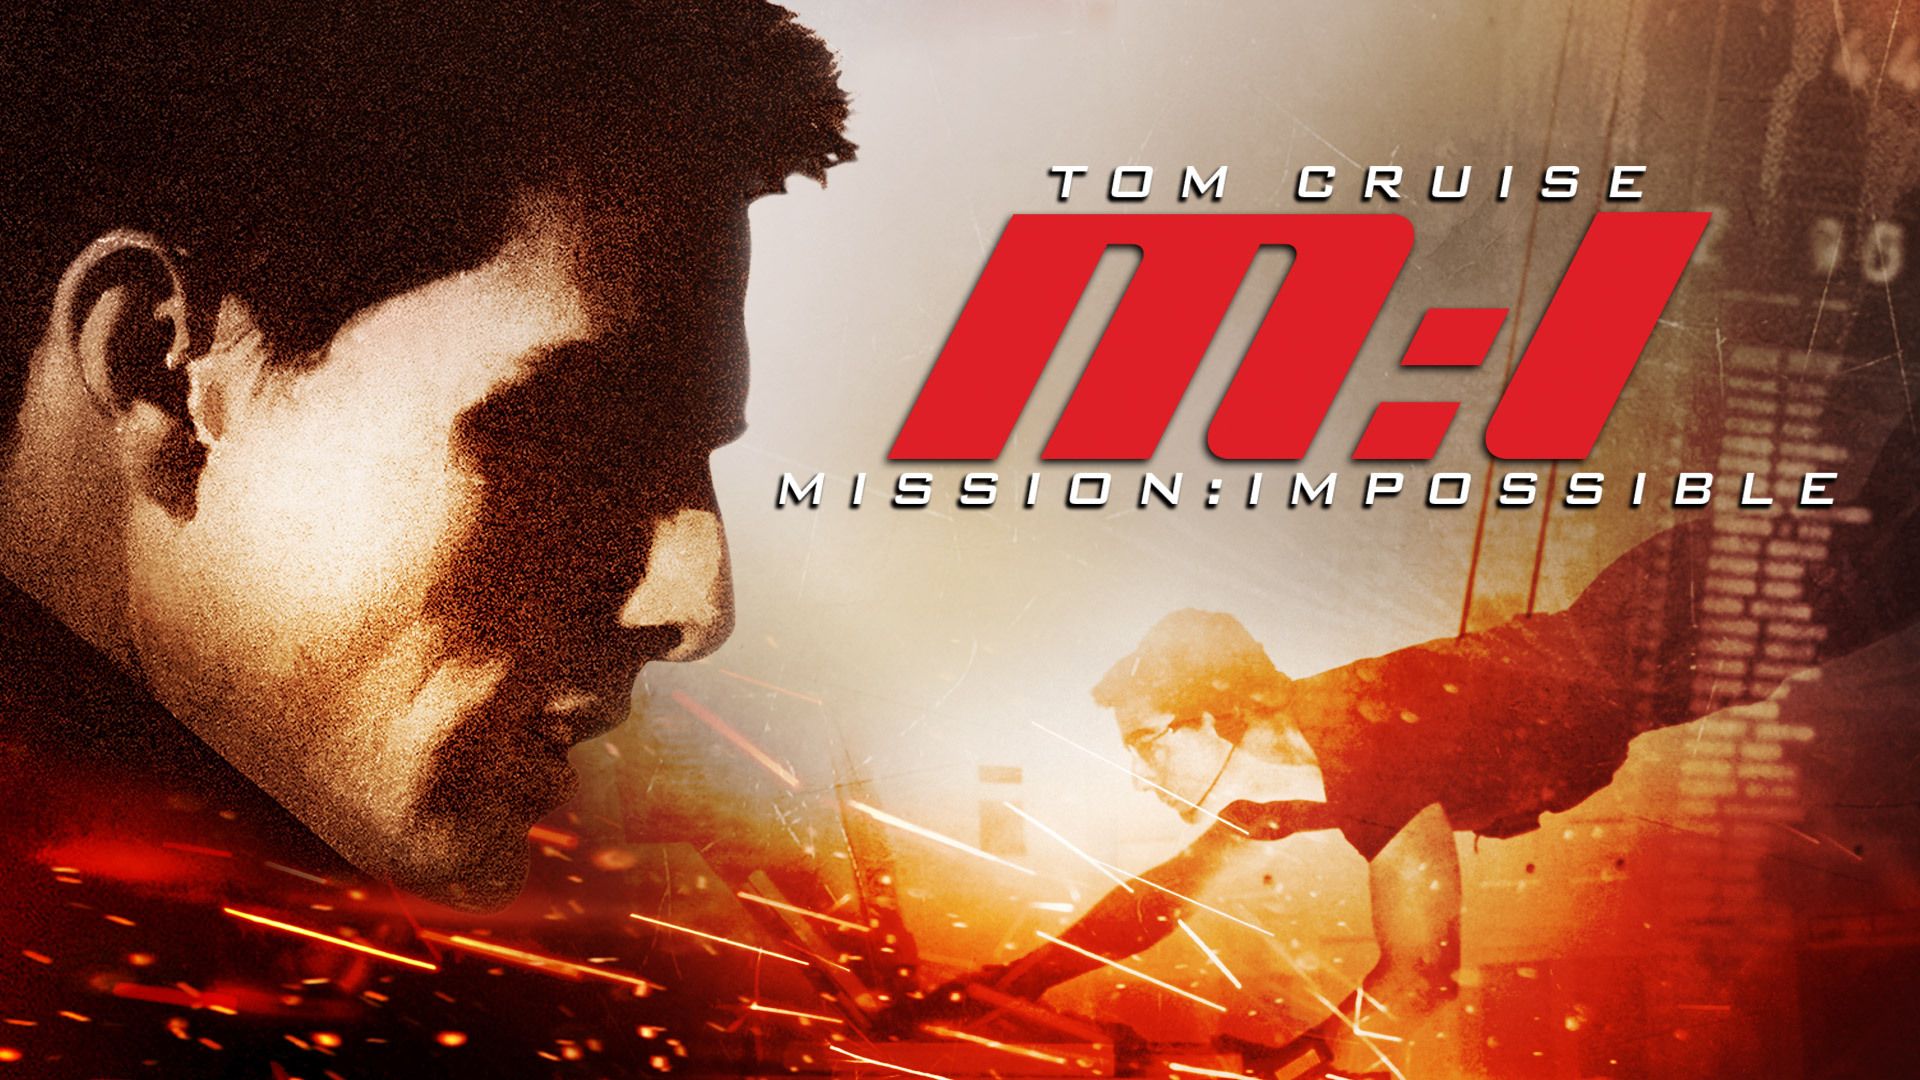 Watch Mission: Impossible now on Paramount Plus